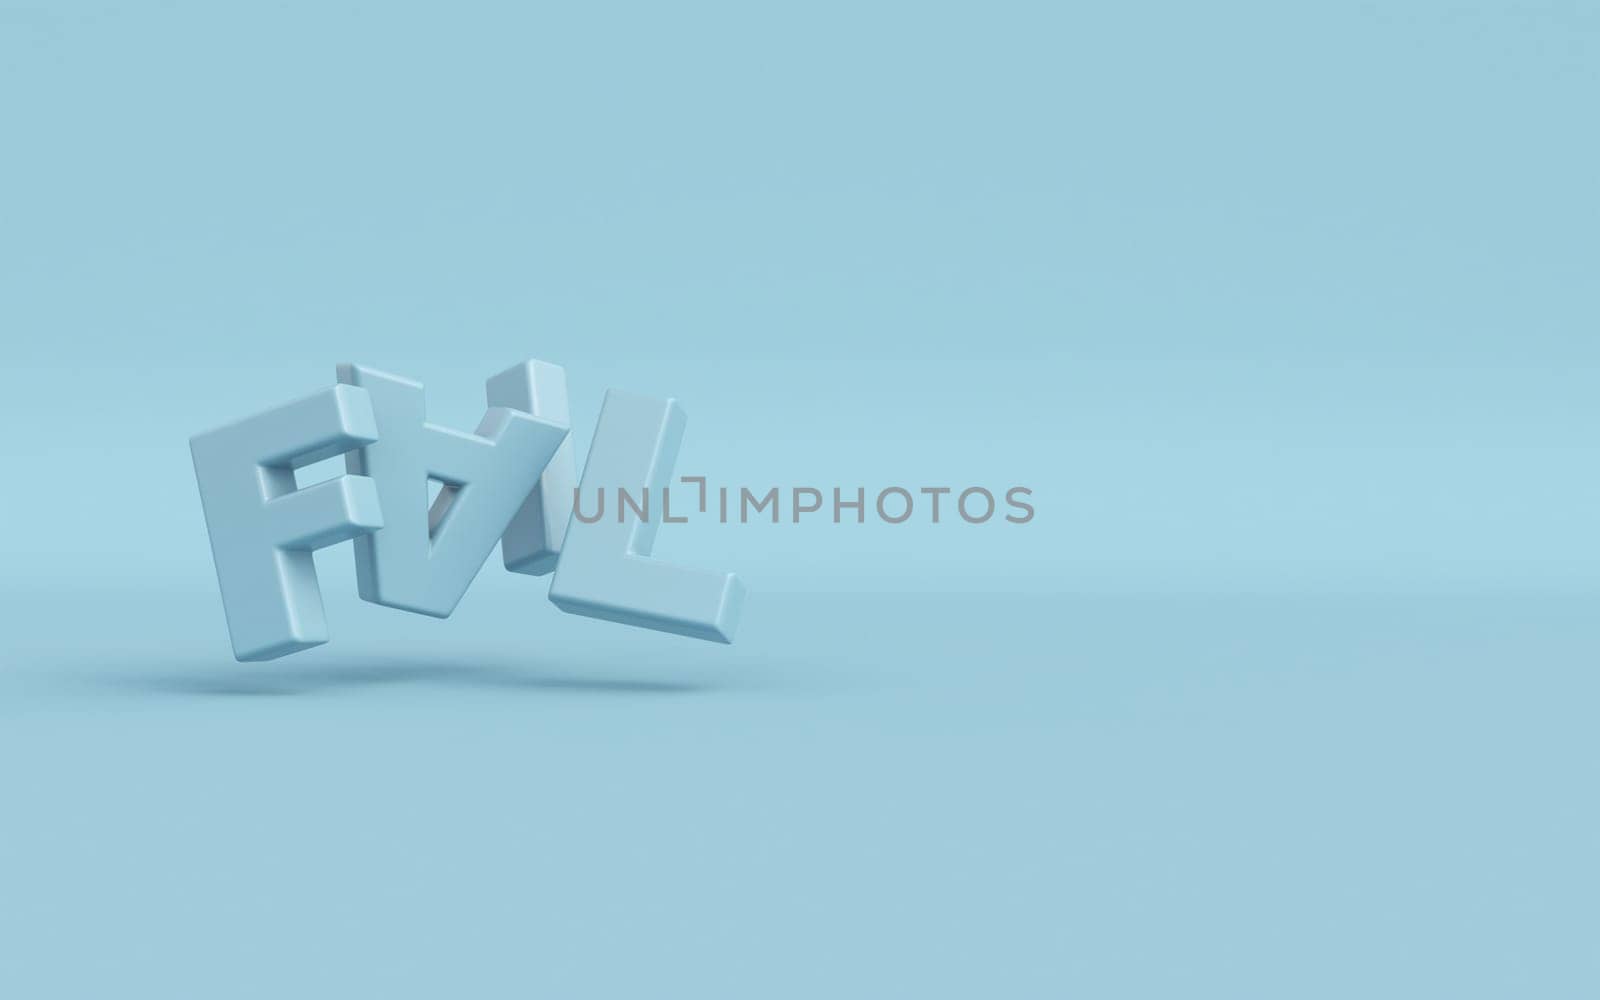 Fail word 3D rendering illustration isolated on blue background